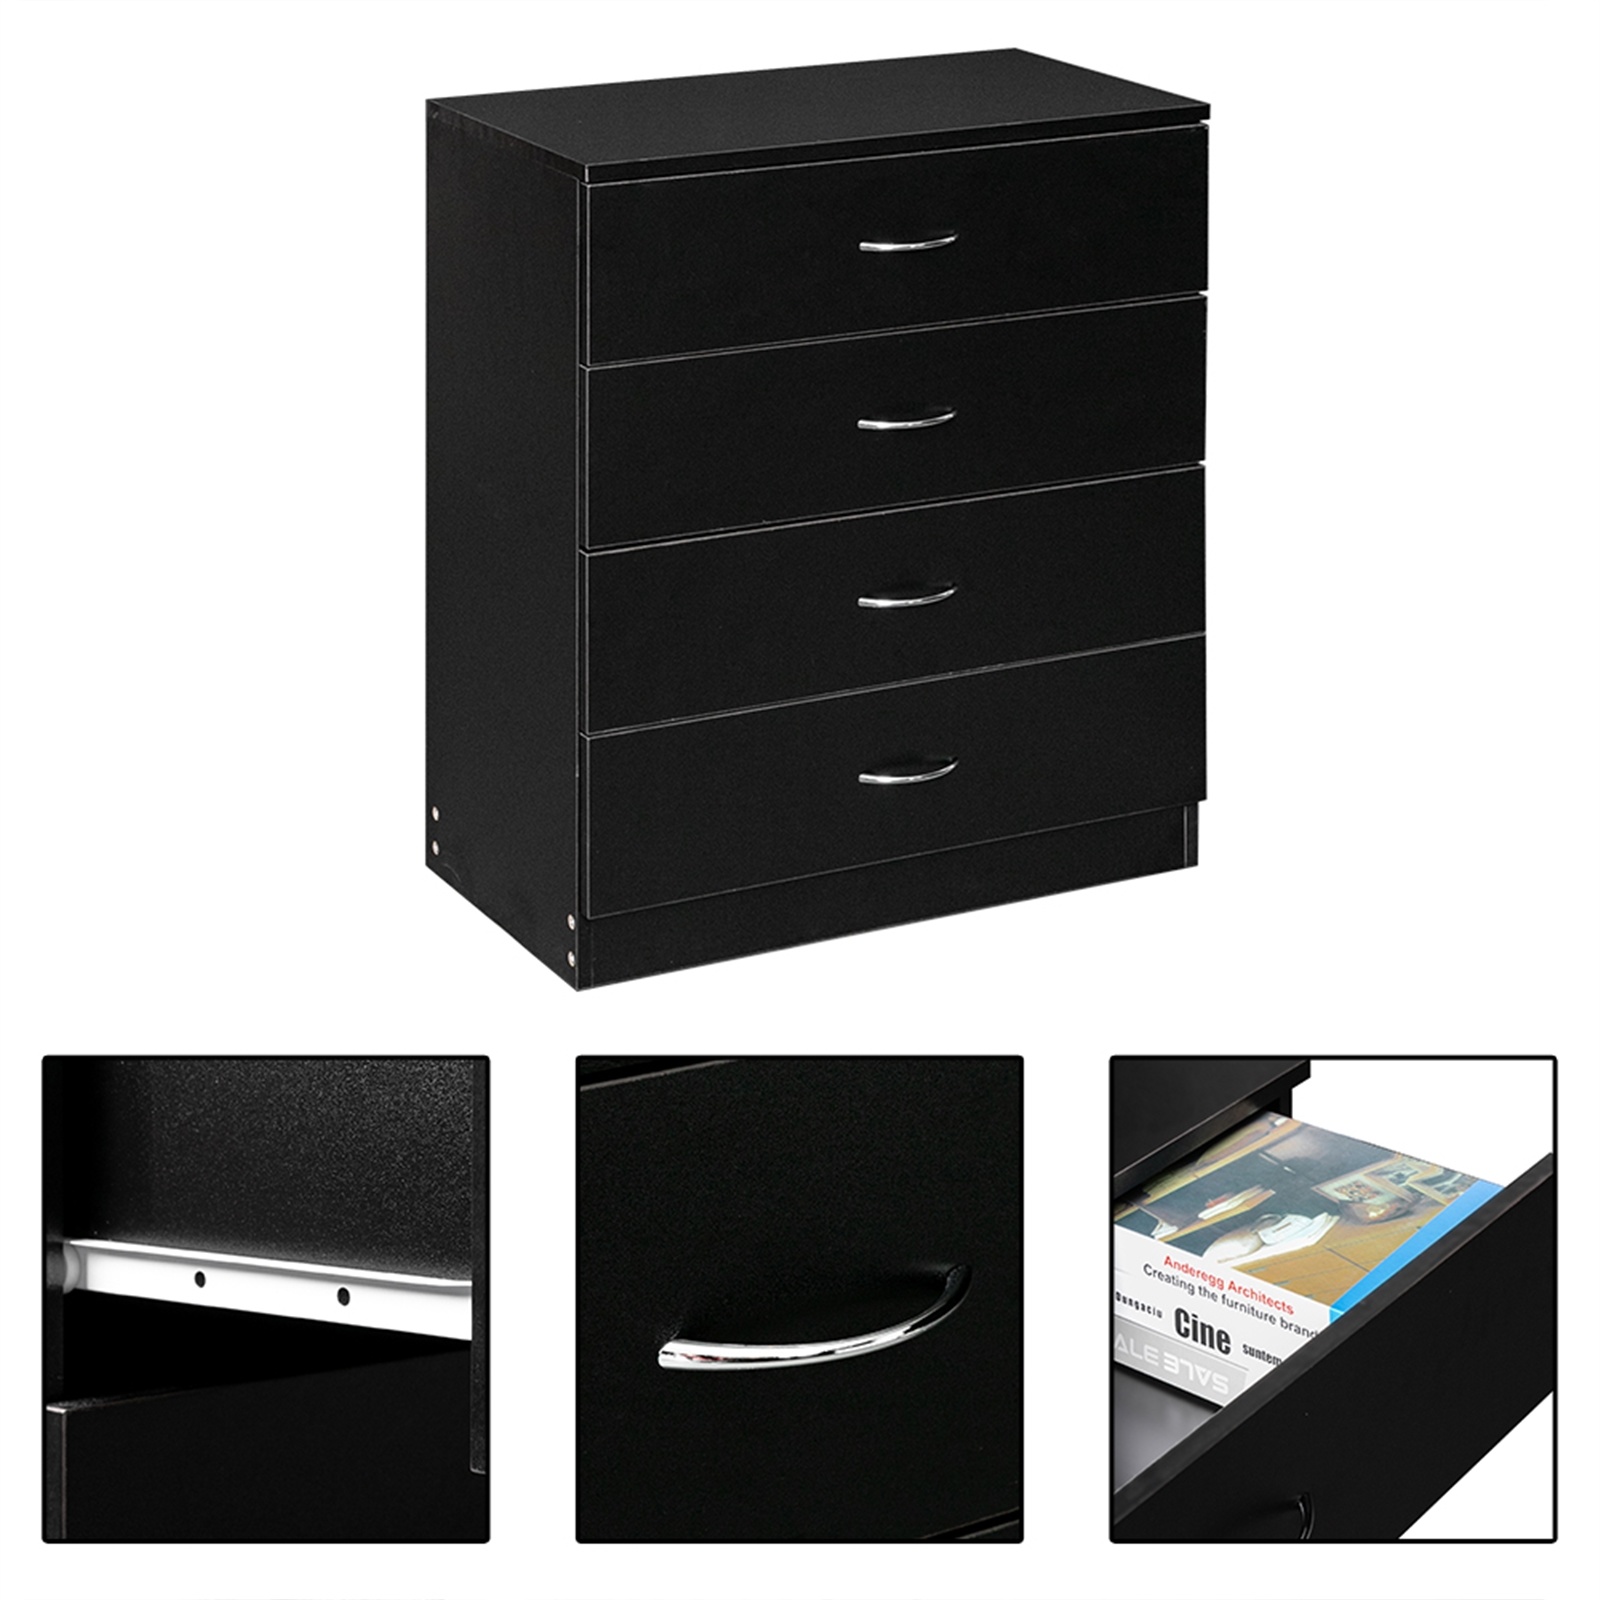 HOMEFUL 4-Drawer Dresser White Wood Cabinet for Closet/Office Clothes Cosmetic Storage Chest Organizer with Drawers Bedroom Night Stand - image 3 of 6